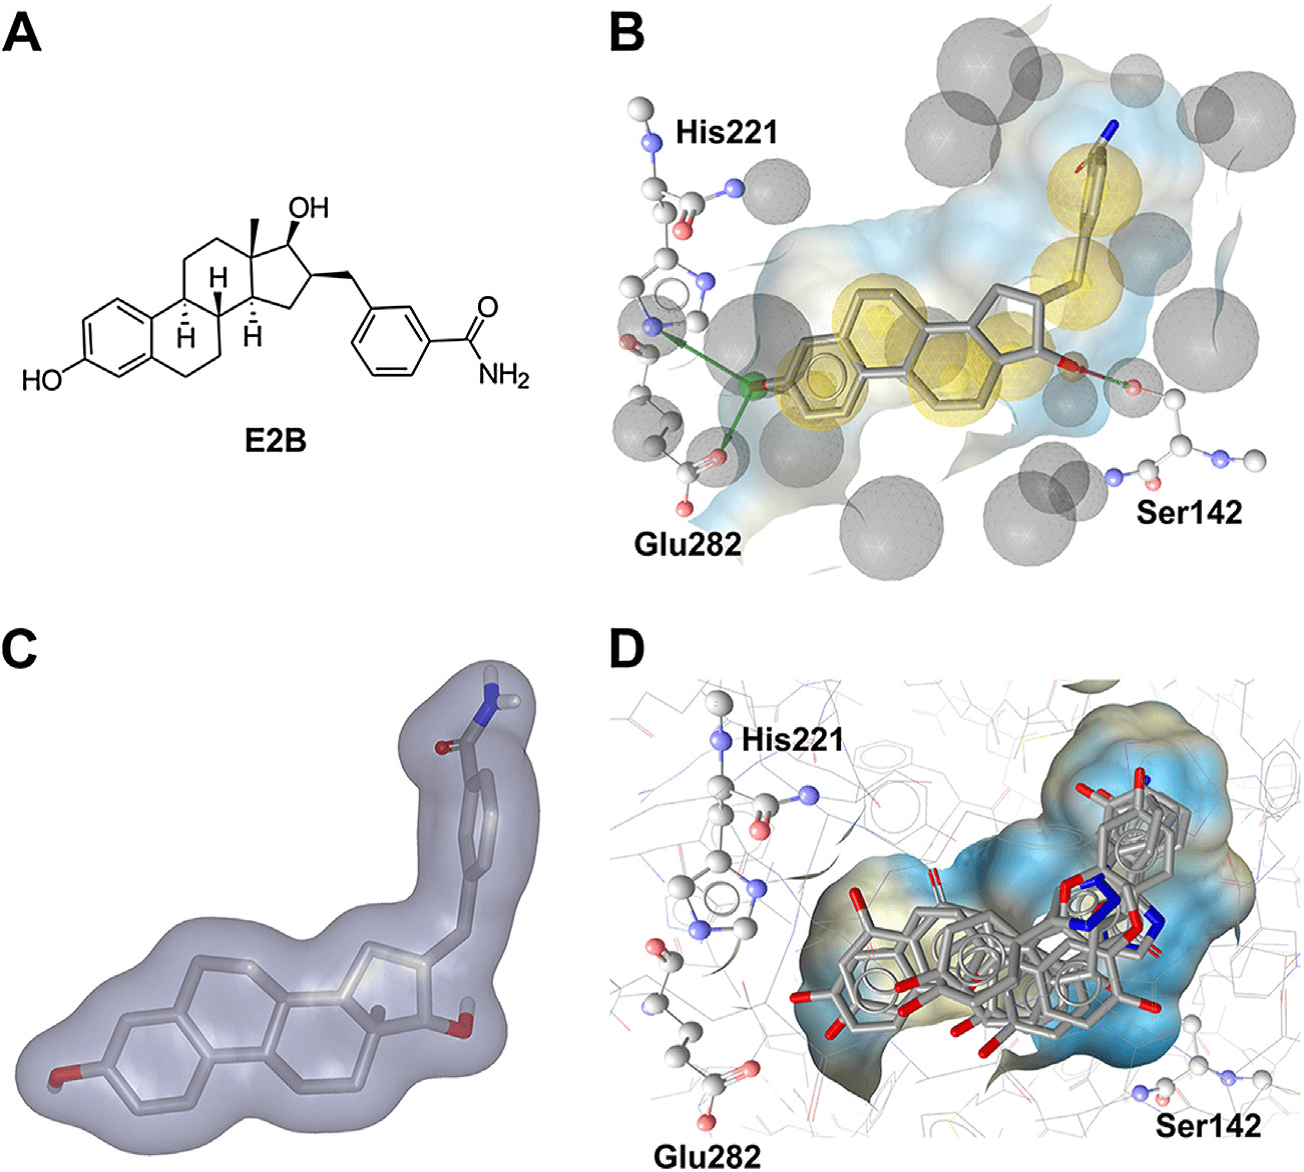 Principles of commonly applied computational tools exemplified on the crystal structure of 17β-HSD1